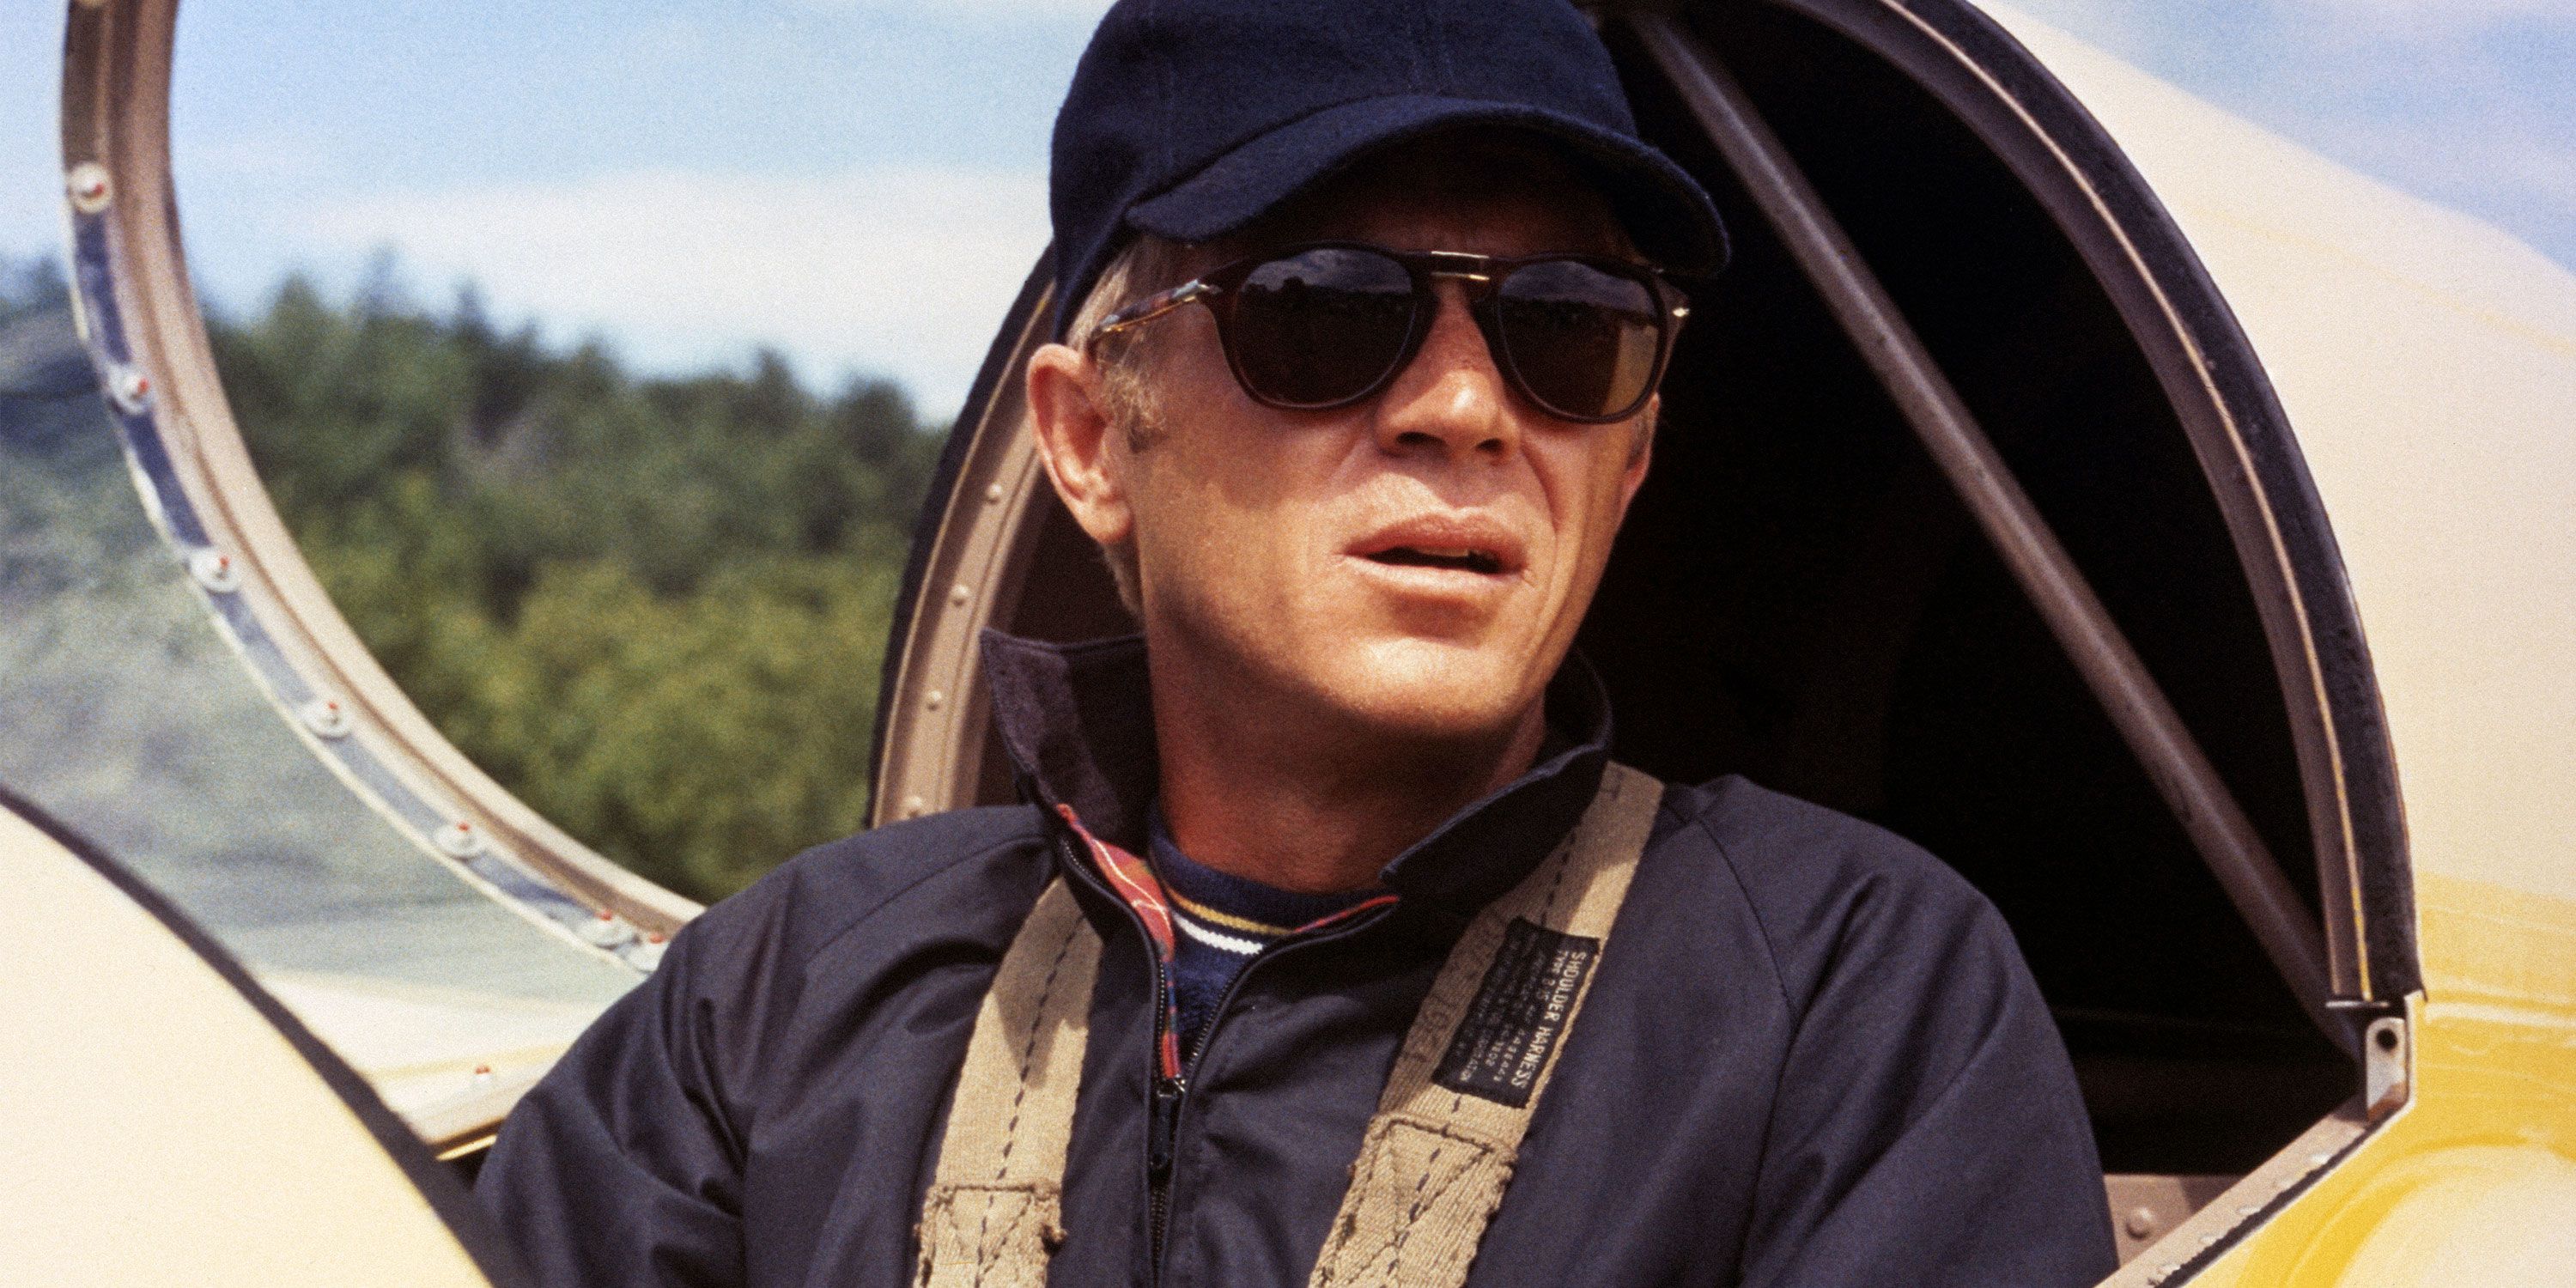 Steve McQueen's Iconic Persol Sunglasses Now Come in New Colors